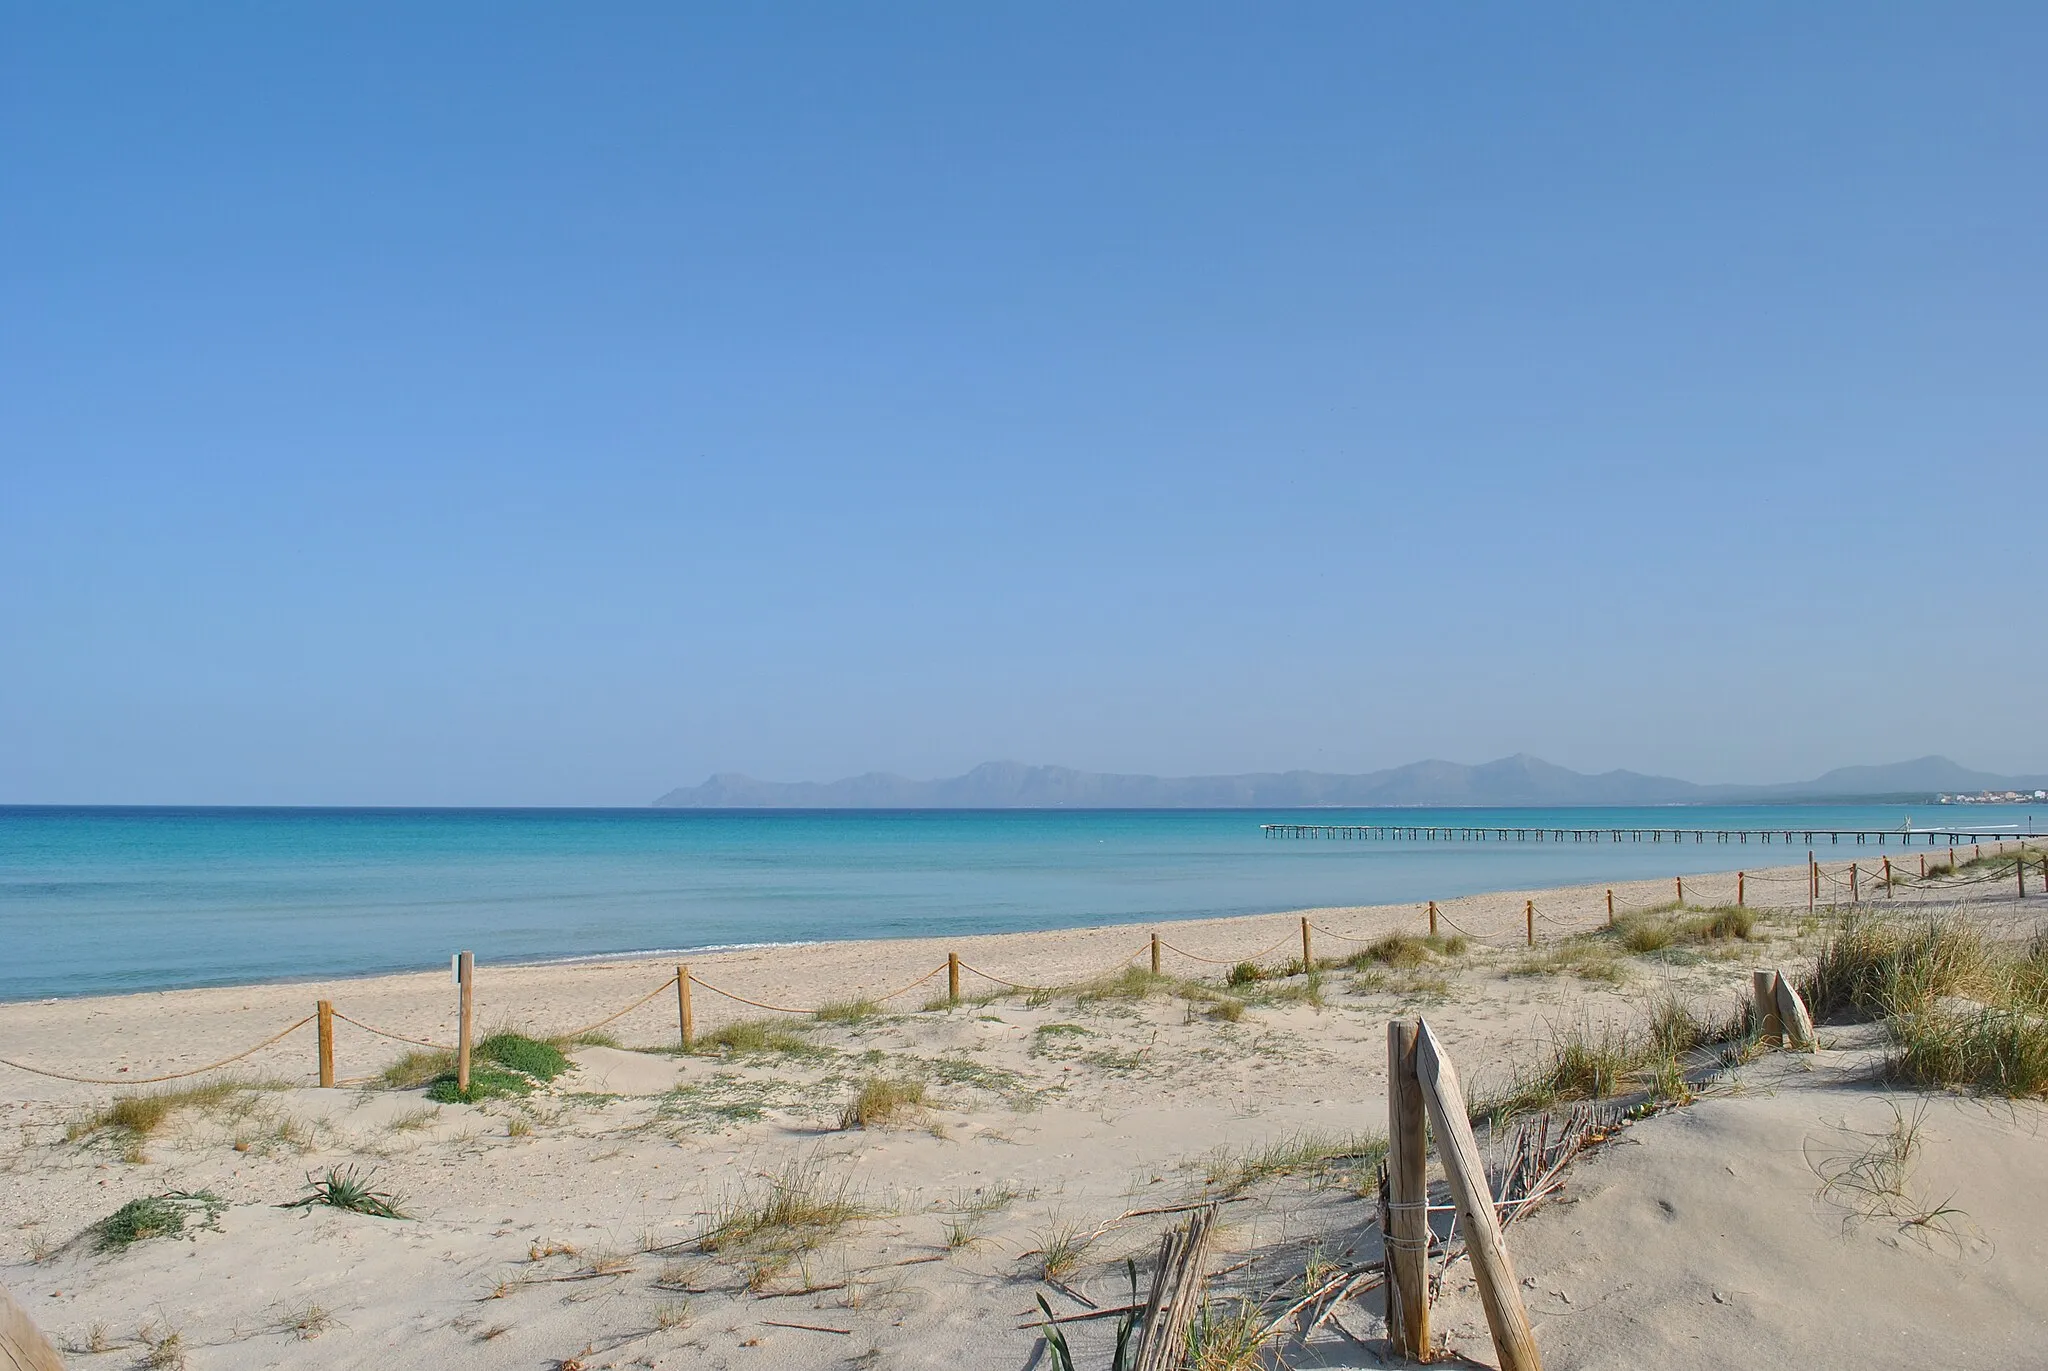 Photo showing: This is a a photo of a beach in the Balearic Islands, Spain, with id: